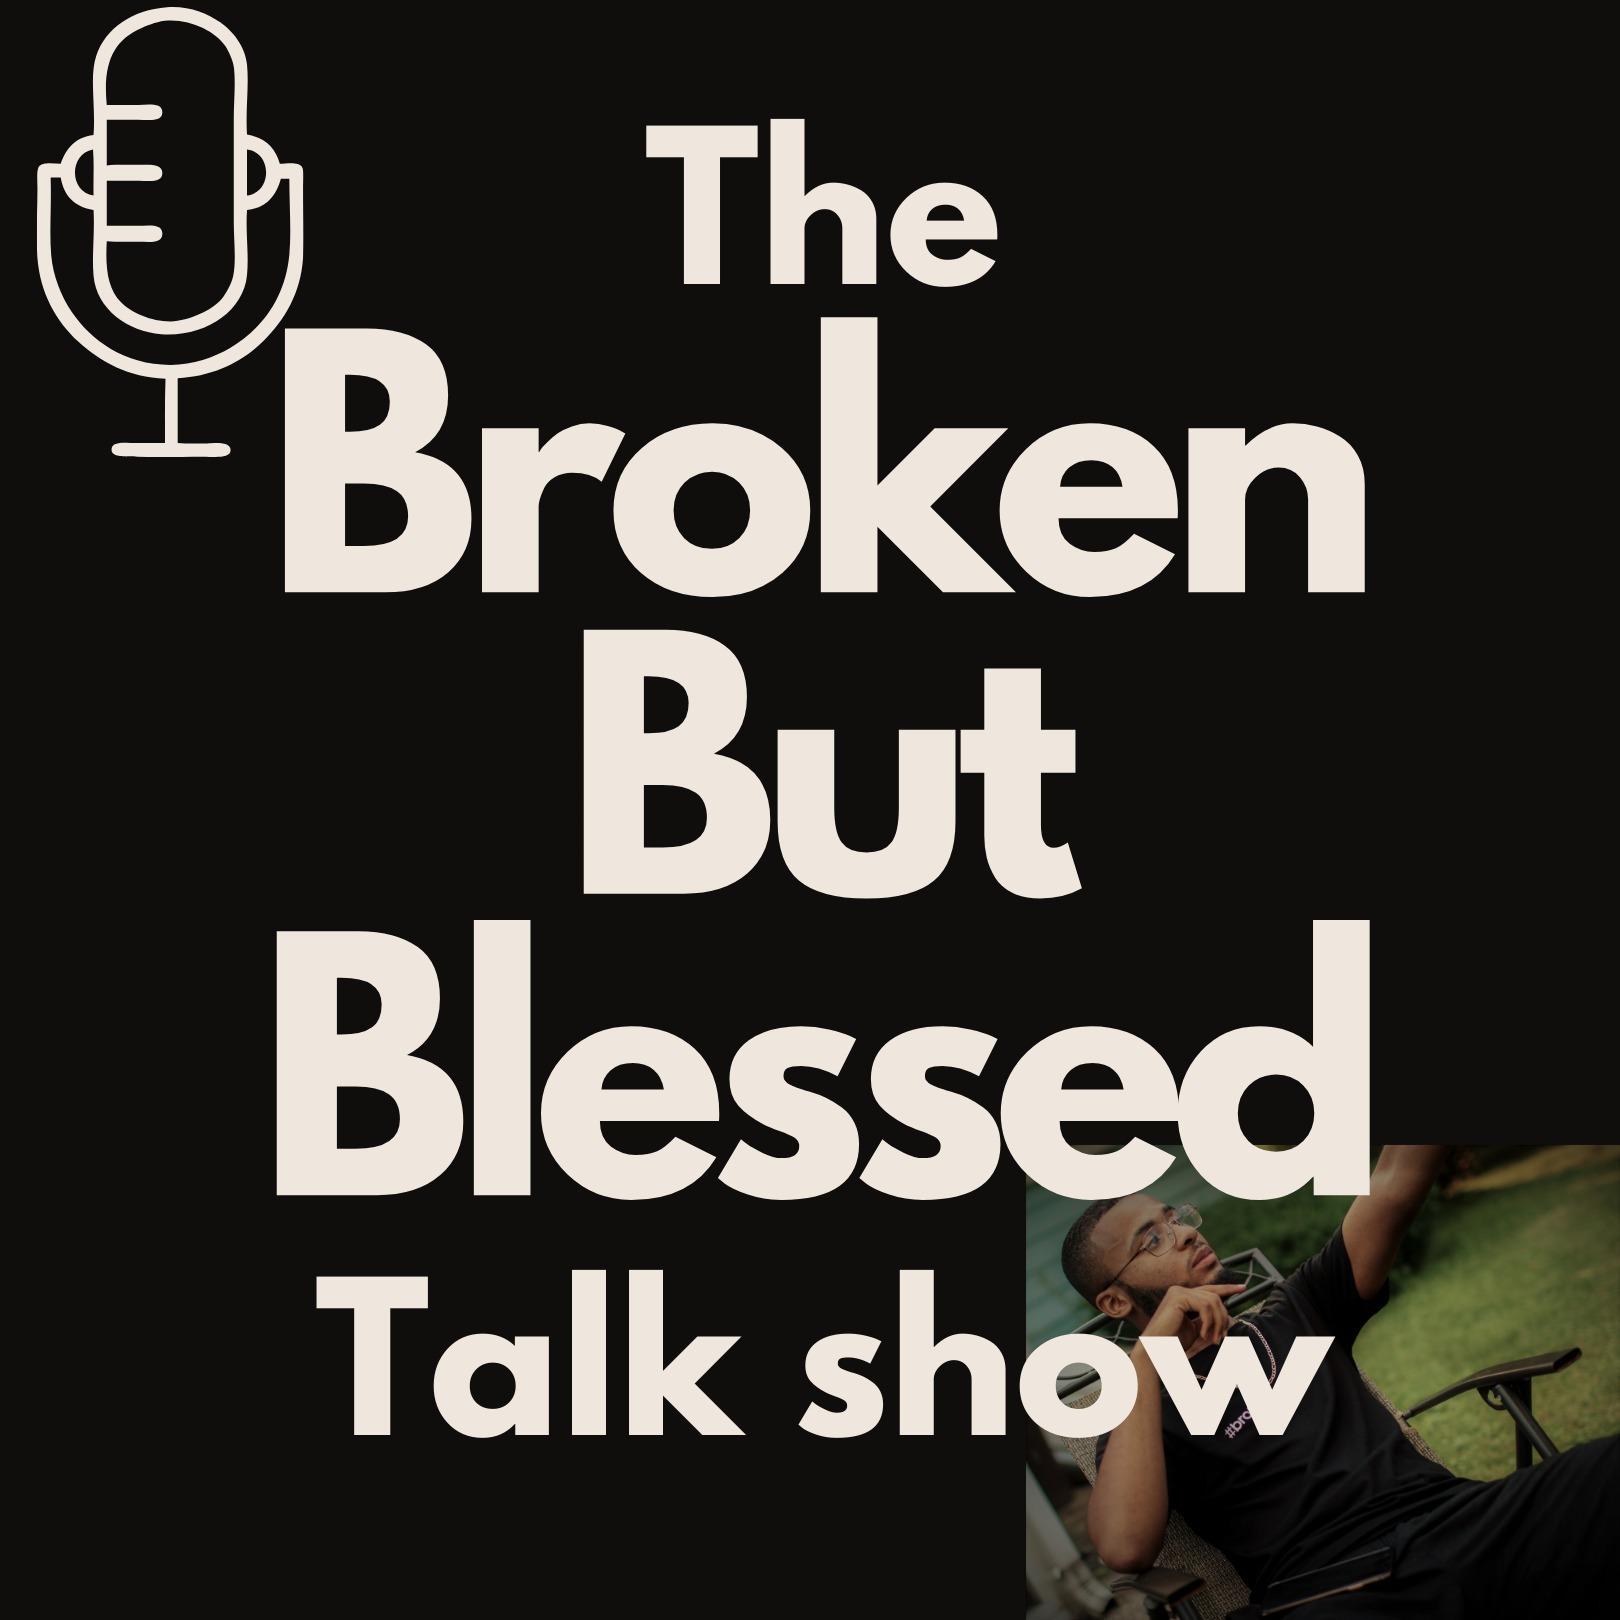 The Broken But Blessed Talk Show